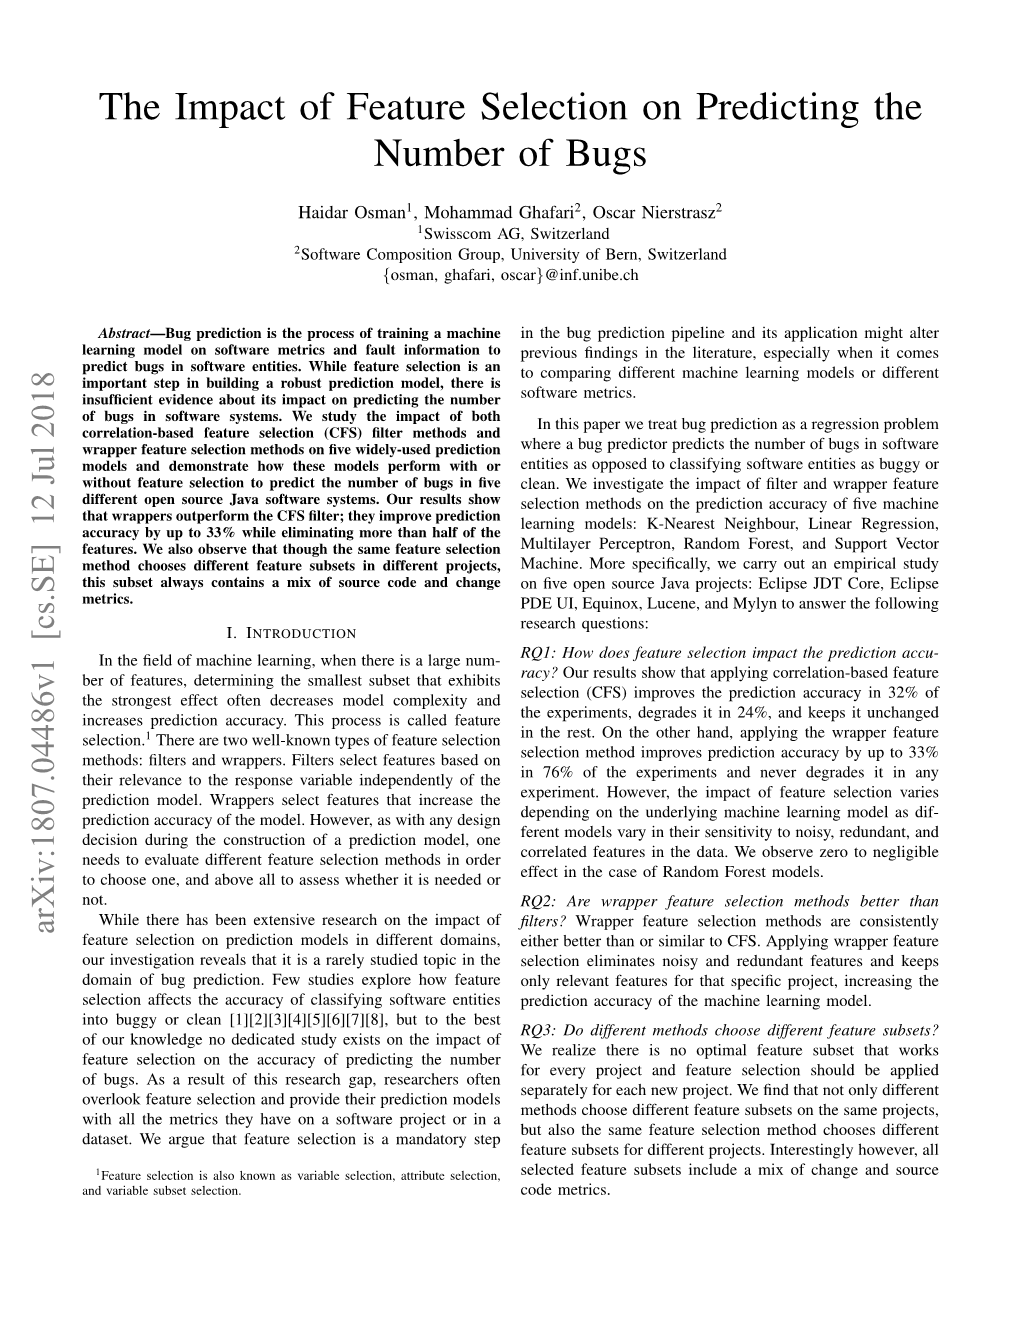 The Impact of Feature Selection on Predicting the Number of Bugs